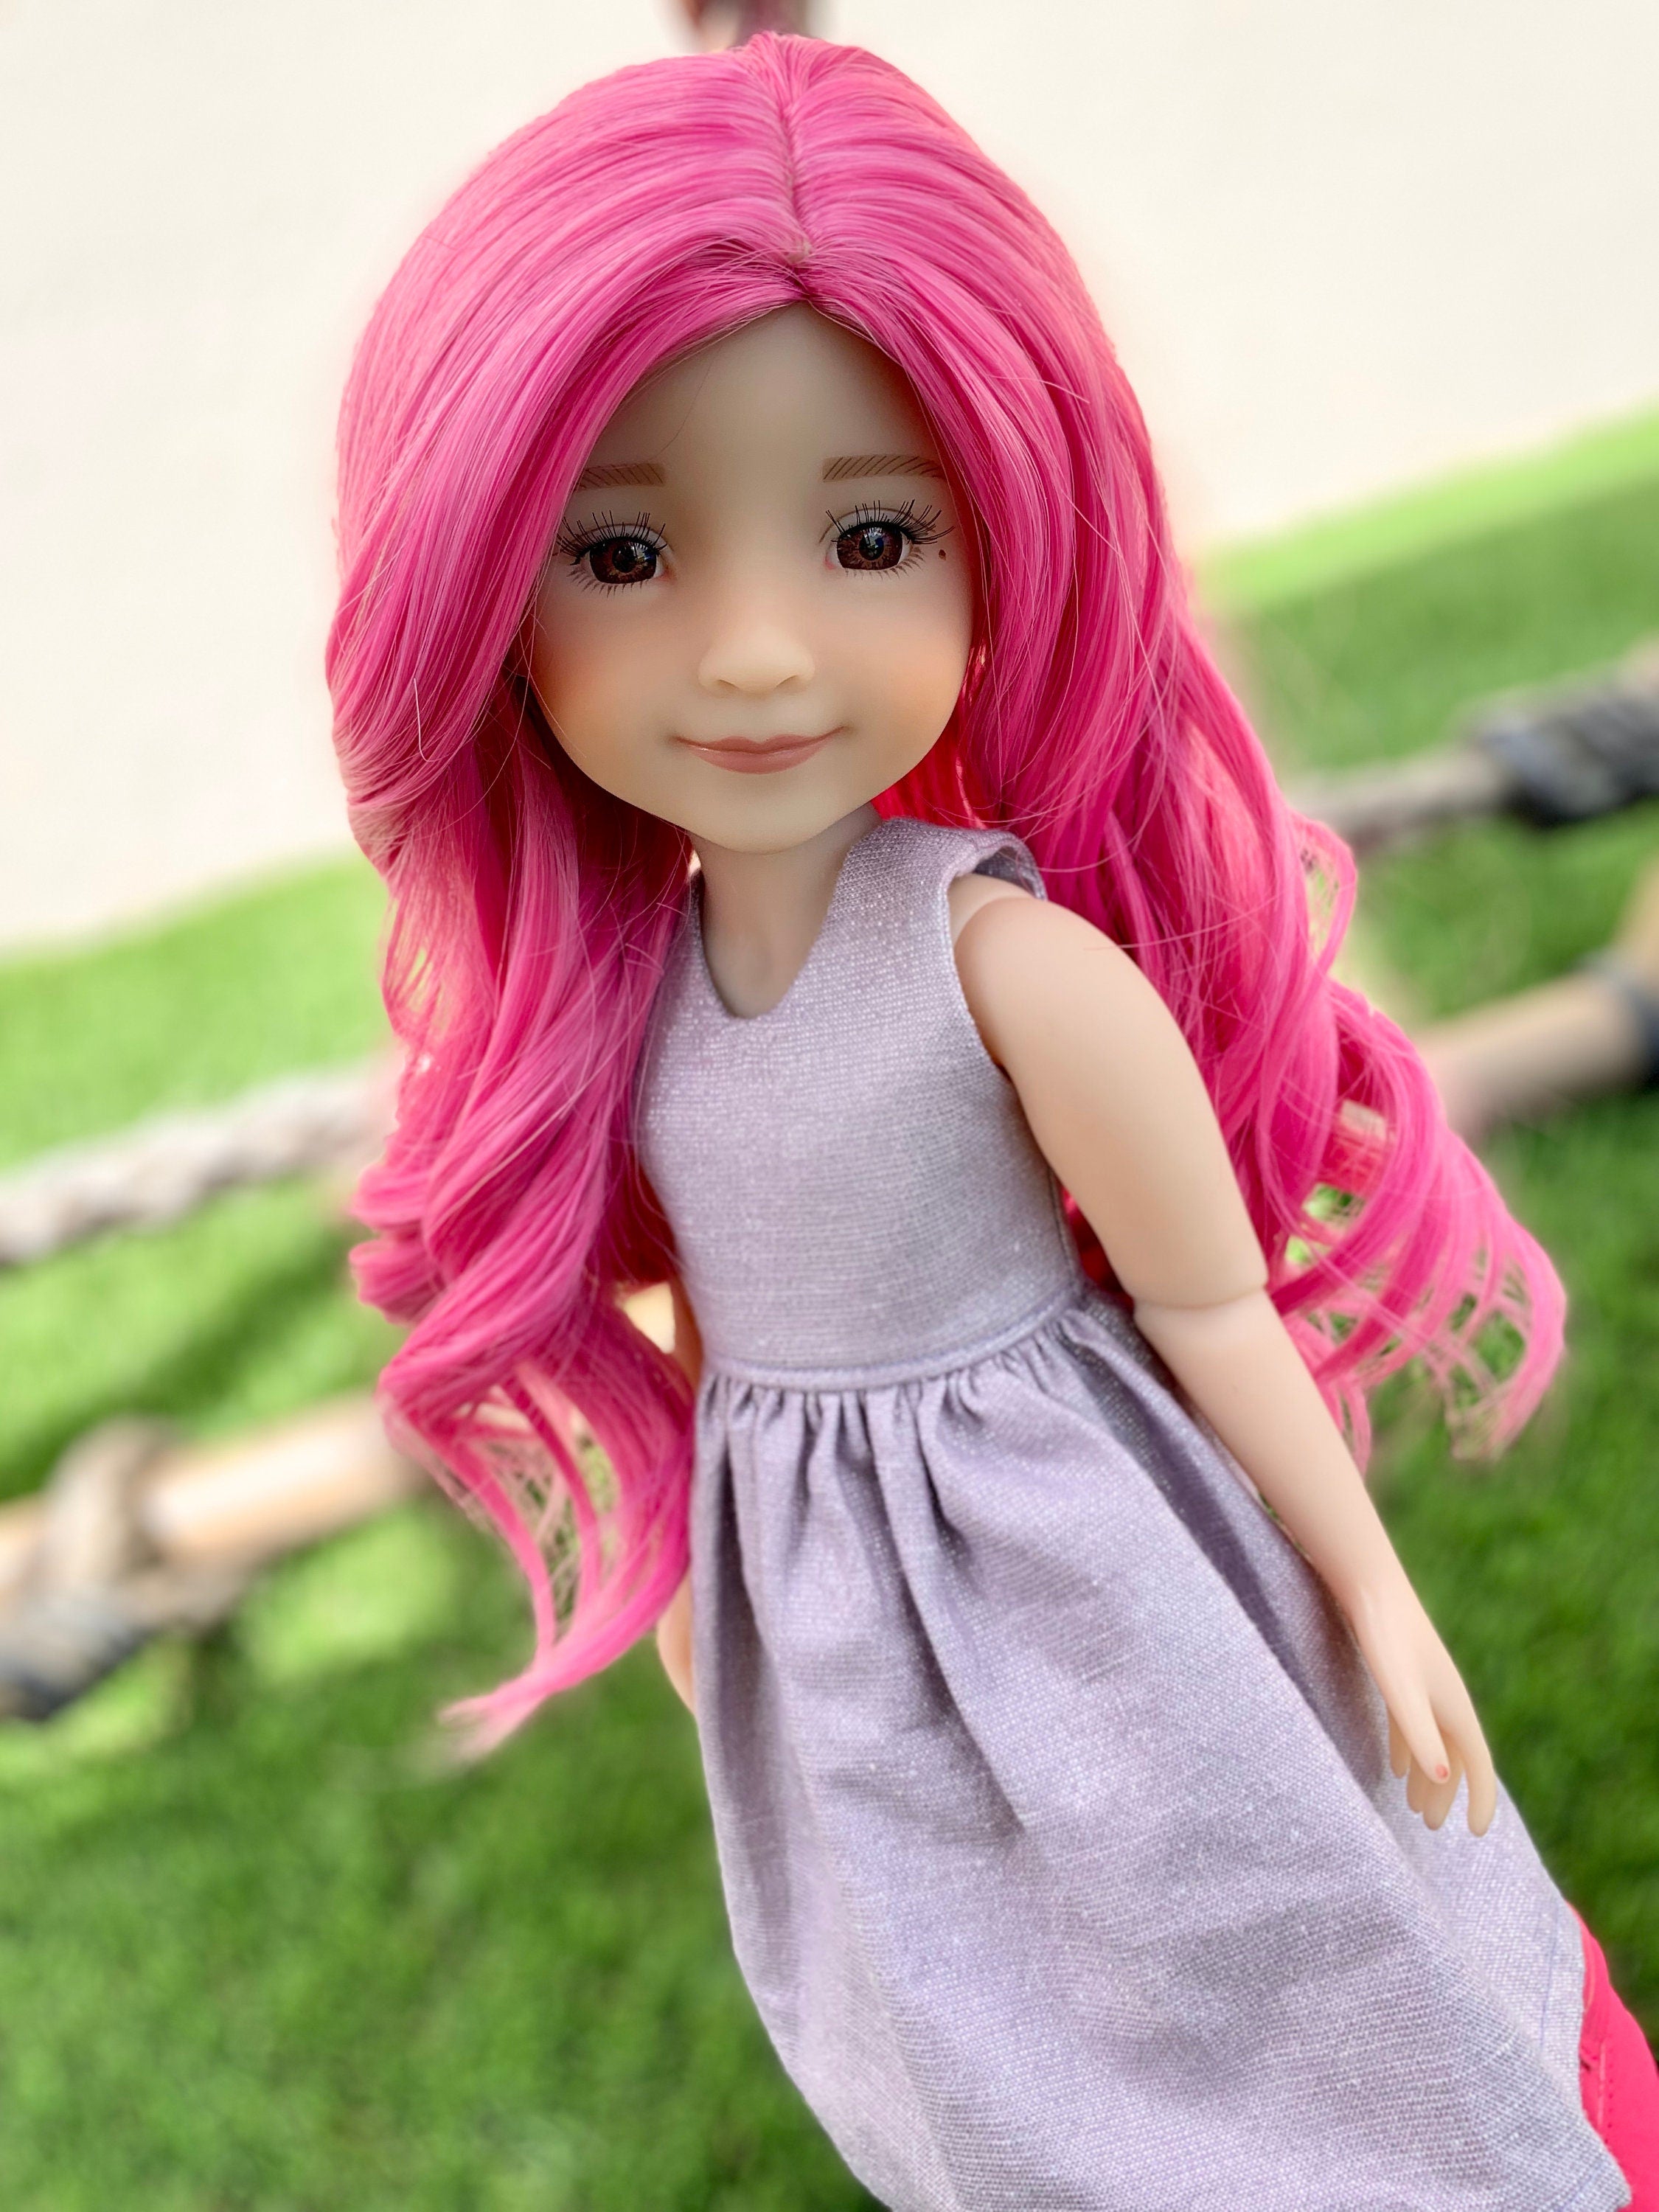 Custom doll WIG for 14"  Dolls - Heat Safe-Tangle Resistant-fits 8-9" head size Kaye Wiggs Ruby Red Fashion Friends girls of the orient Pink